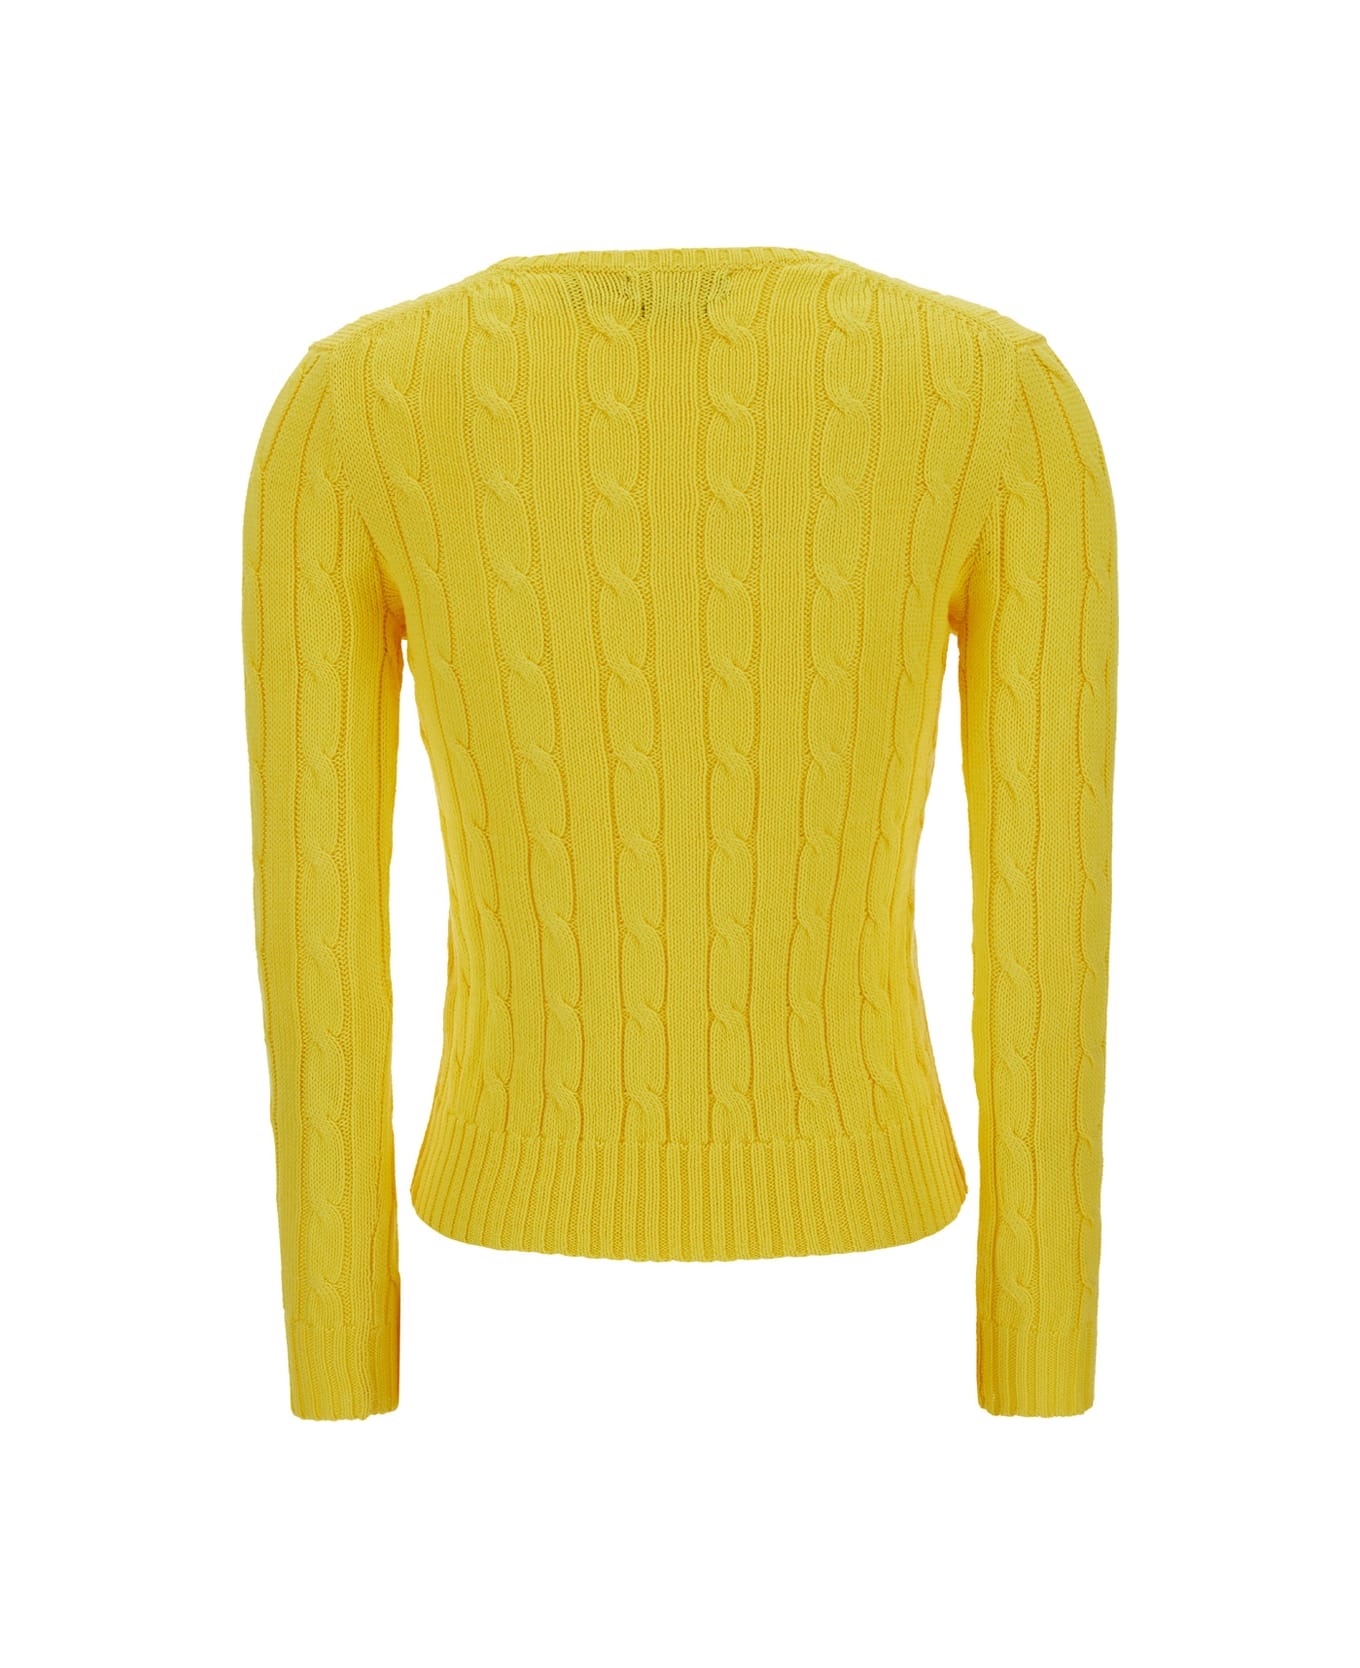 Polo Ralph Lauren Yellow Tight Fit Crew Neck Sweater In Cotton Woman - Yellow